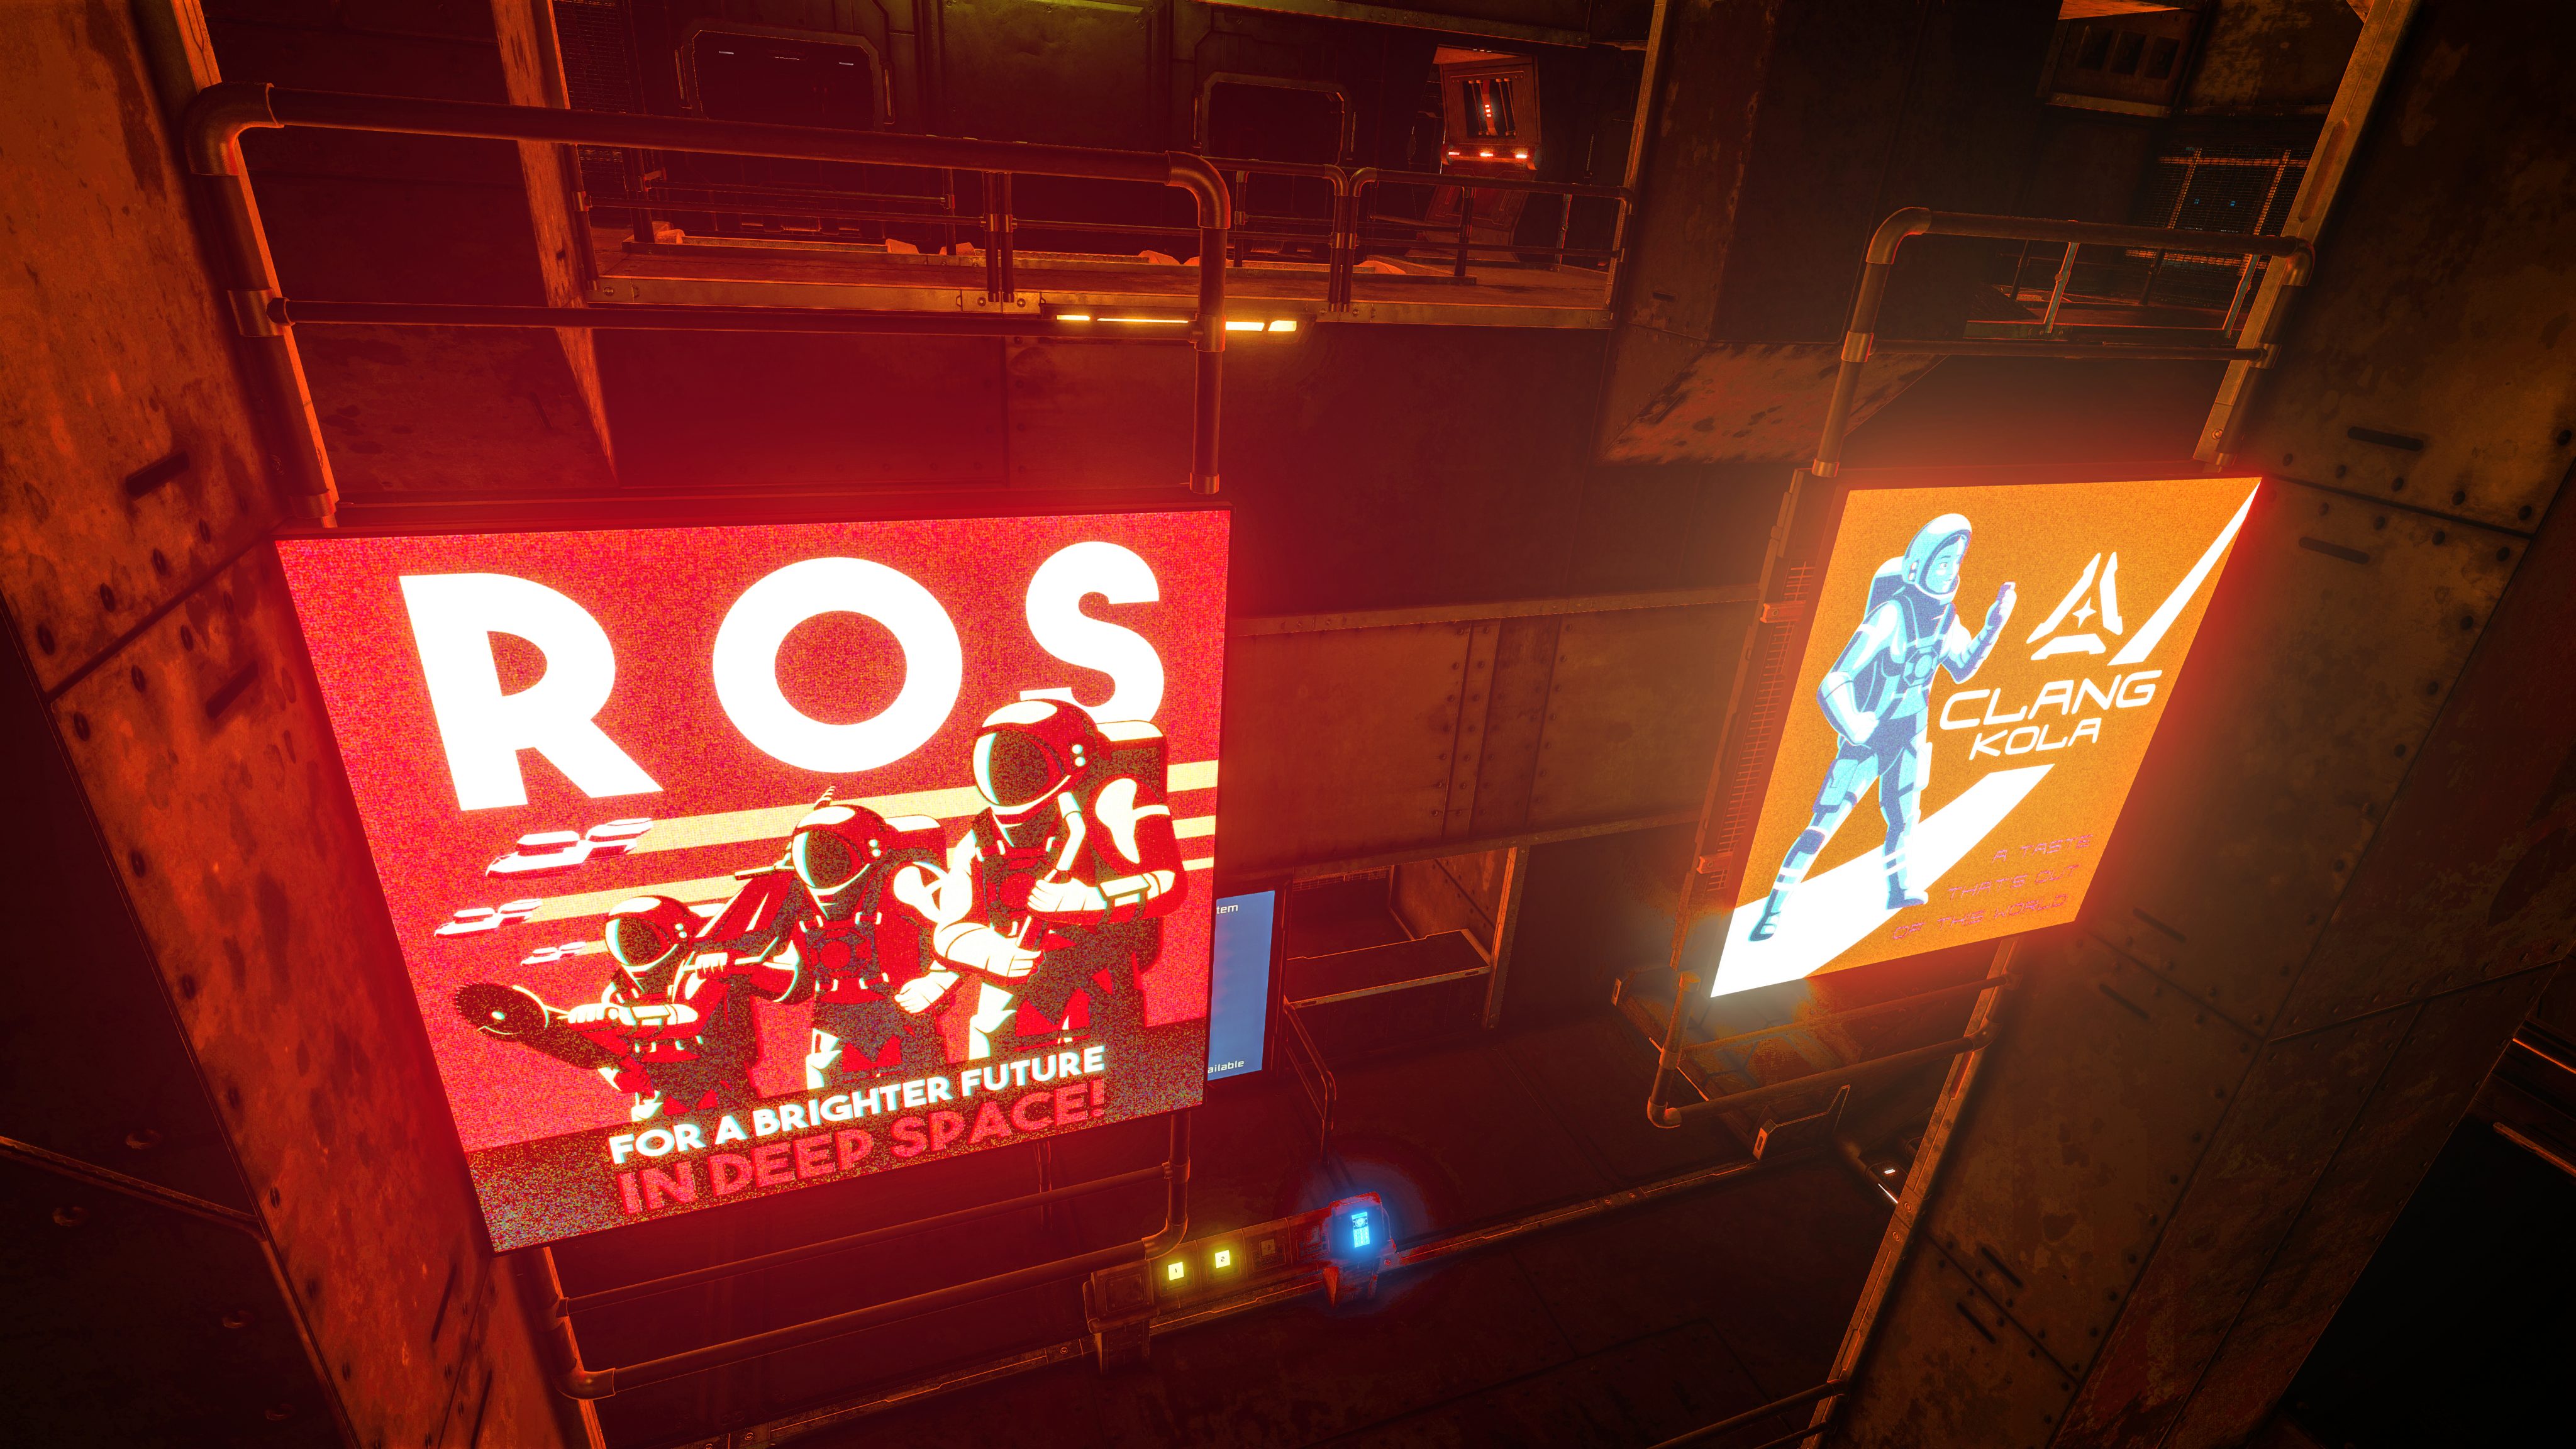 HD desktop wallpaper featuring space engineering themes with vibrant advertisements for ROS and CLANG COLA set in a futuristic industrial setting.